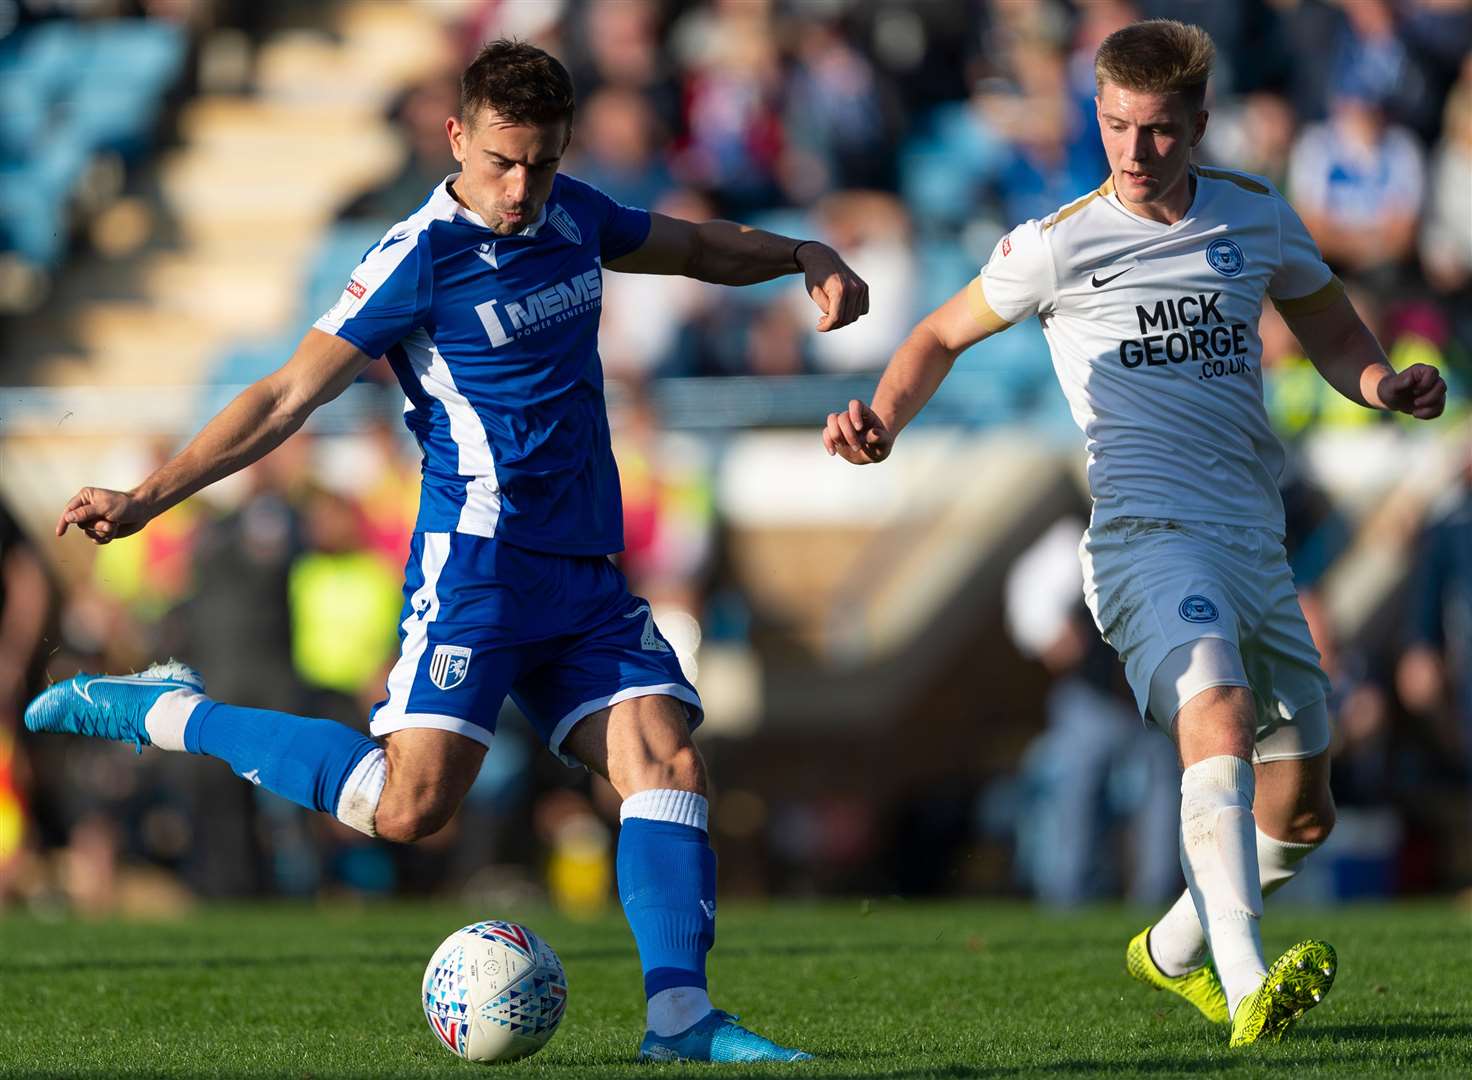 Gillingham's Olly Lee goes for goal against Peterborough on Saturday. Picture: Ady Kerry